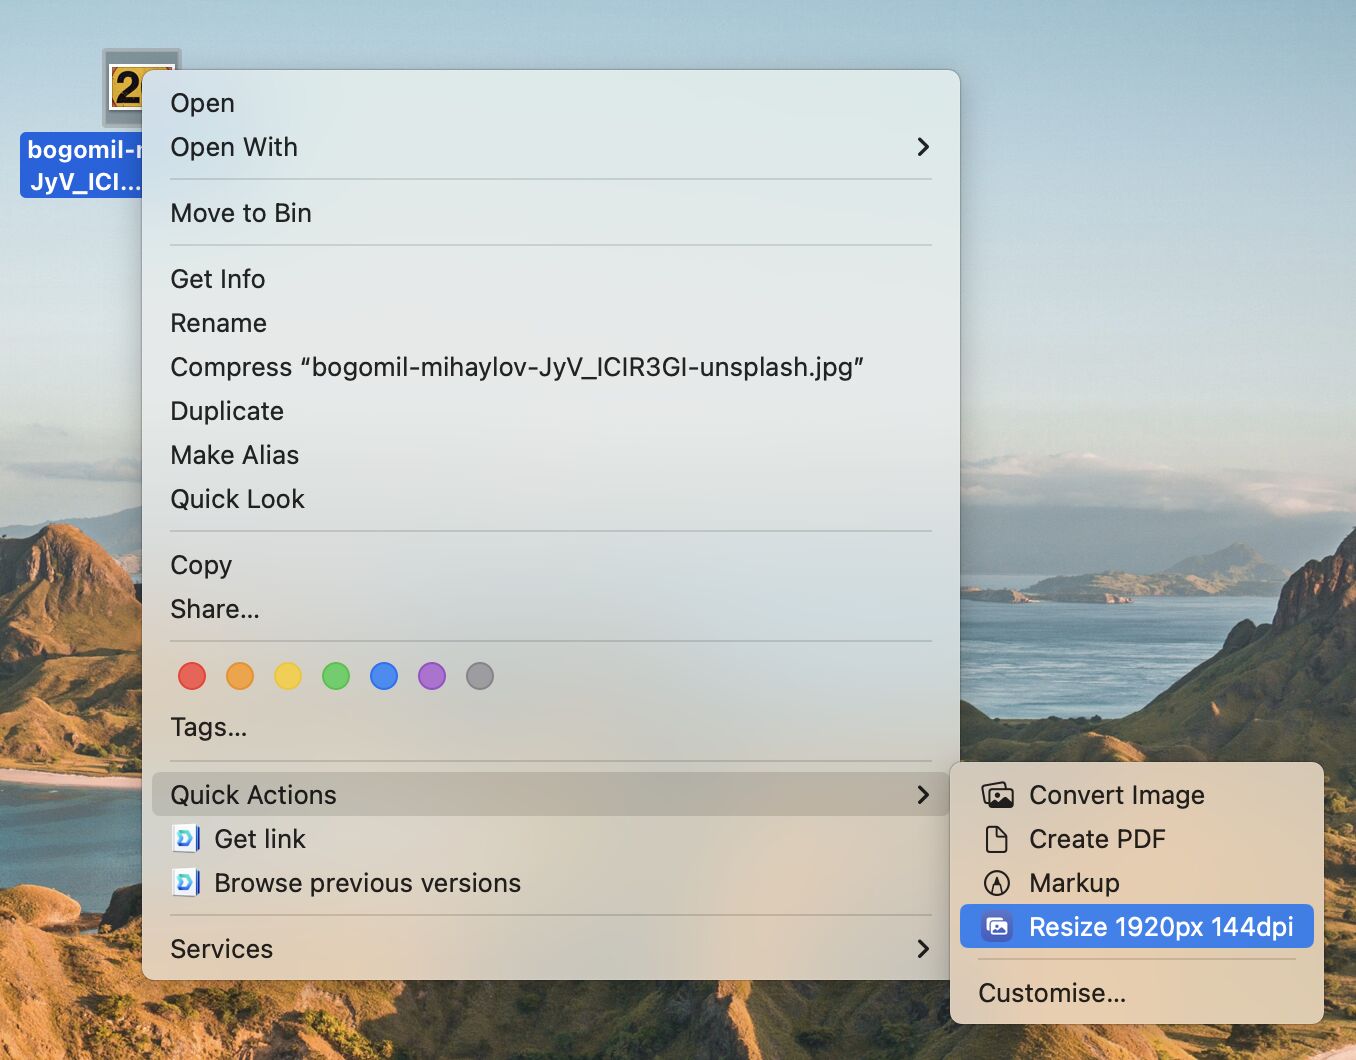 macos right click menu on an image showing a new quick action menu